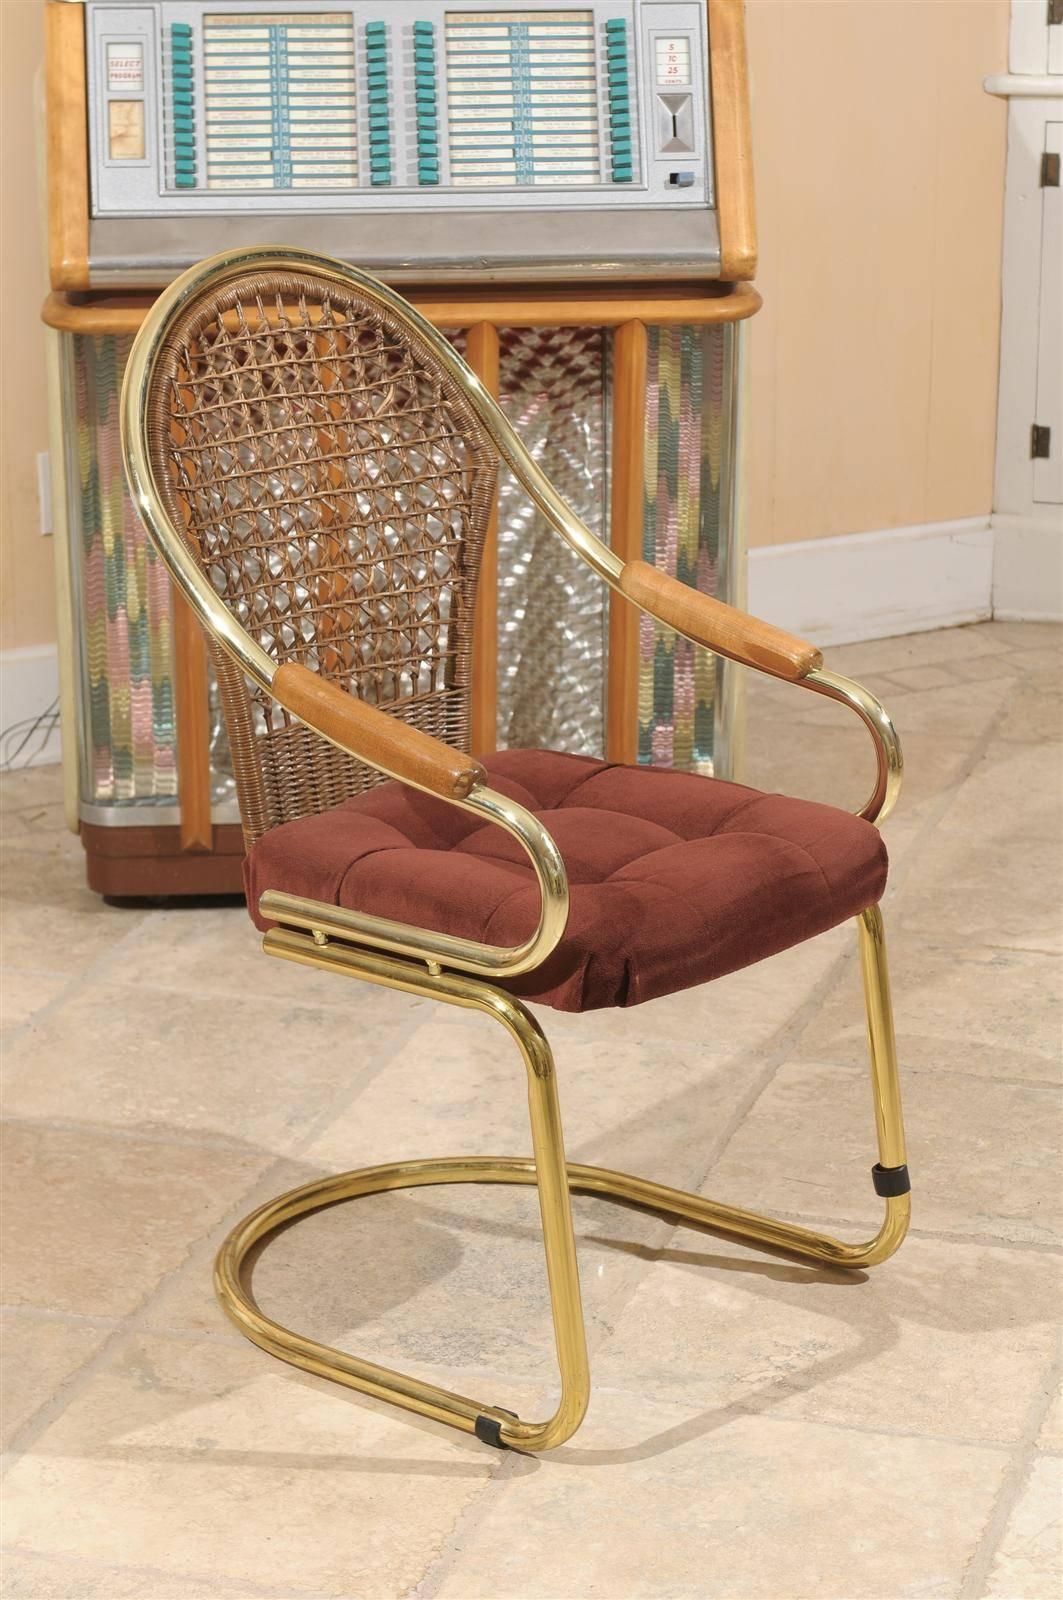 Mid-Century cantilevered desk or side chair of brass with a cane back, wooden armrests and a tufted upholstered seat. The chair comes with rubber removable floor guards.